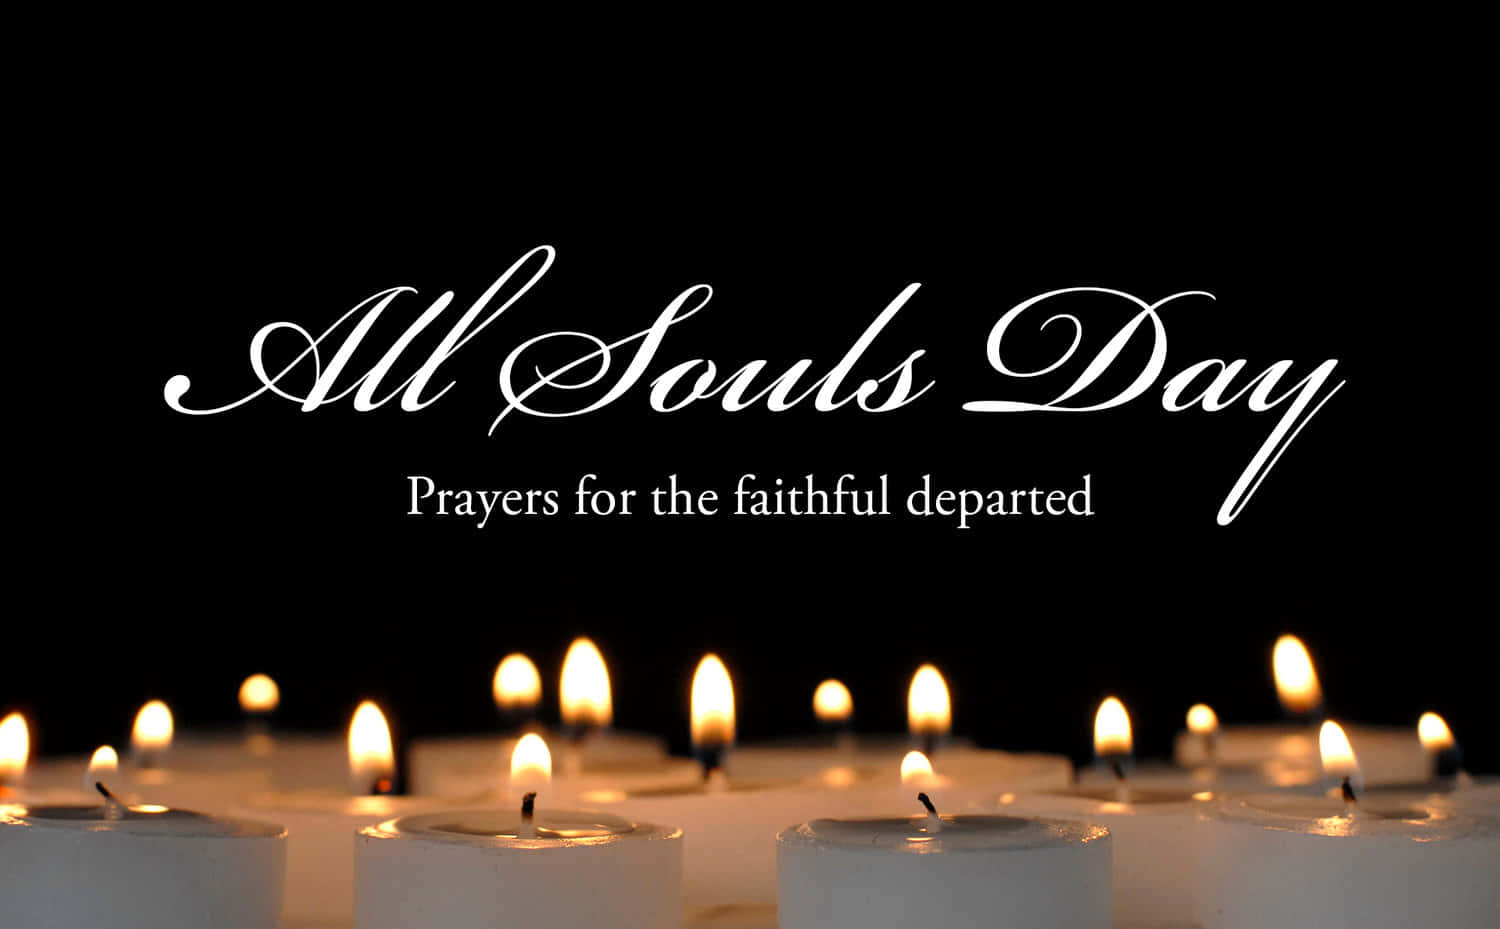 Honoring All Souls' Day With Beautiful Candlelight Wallpaper